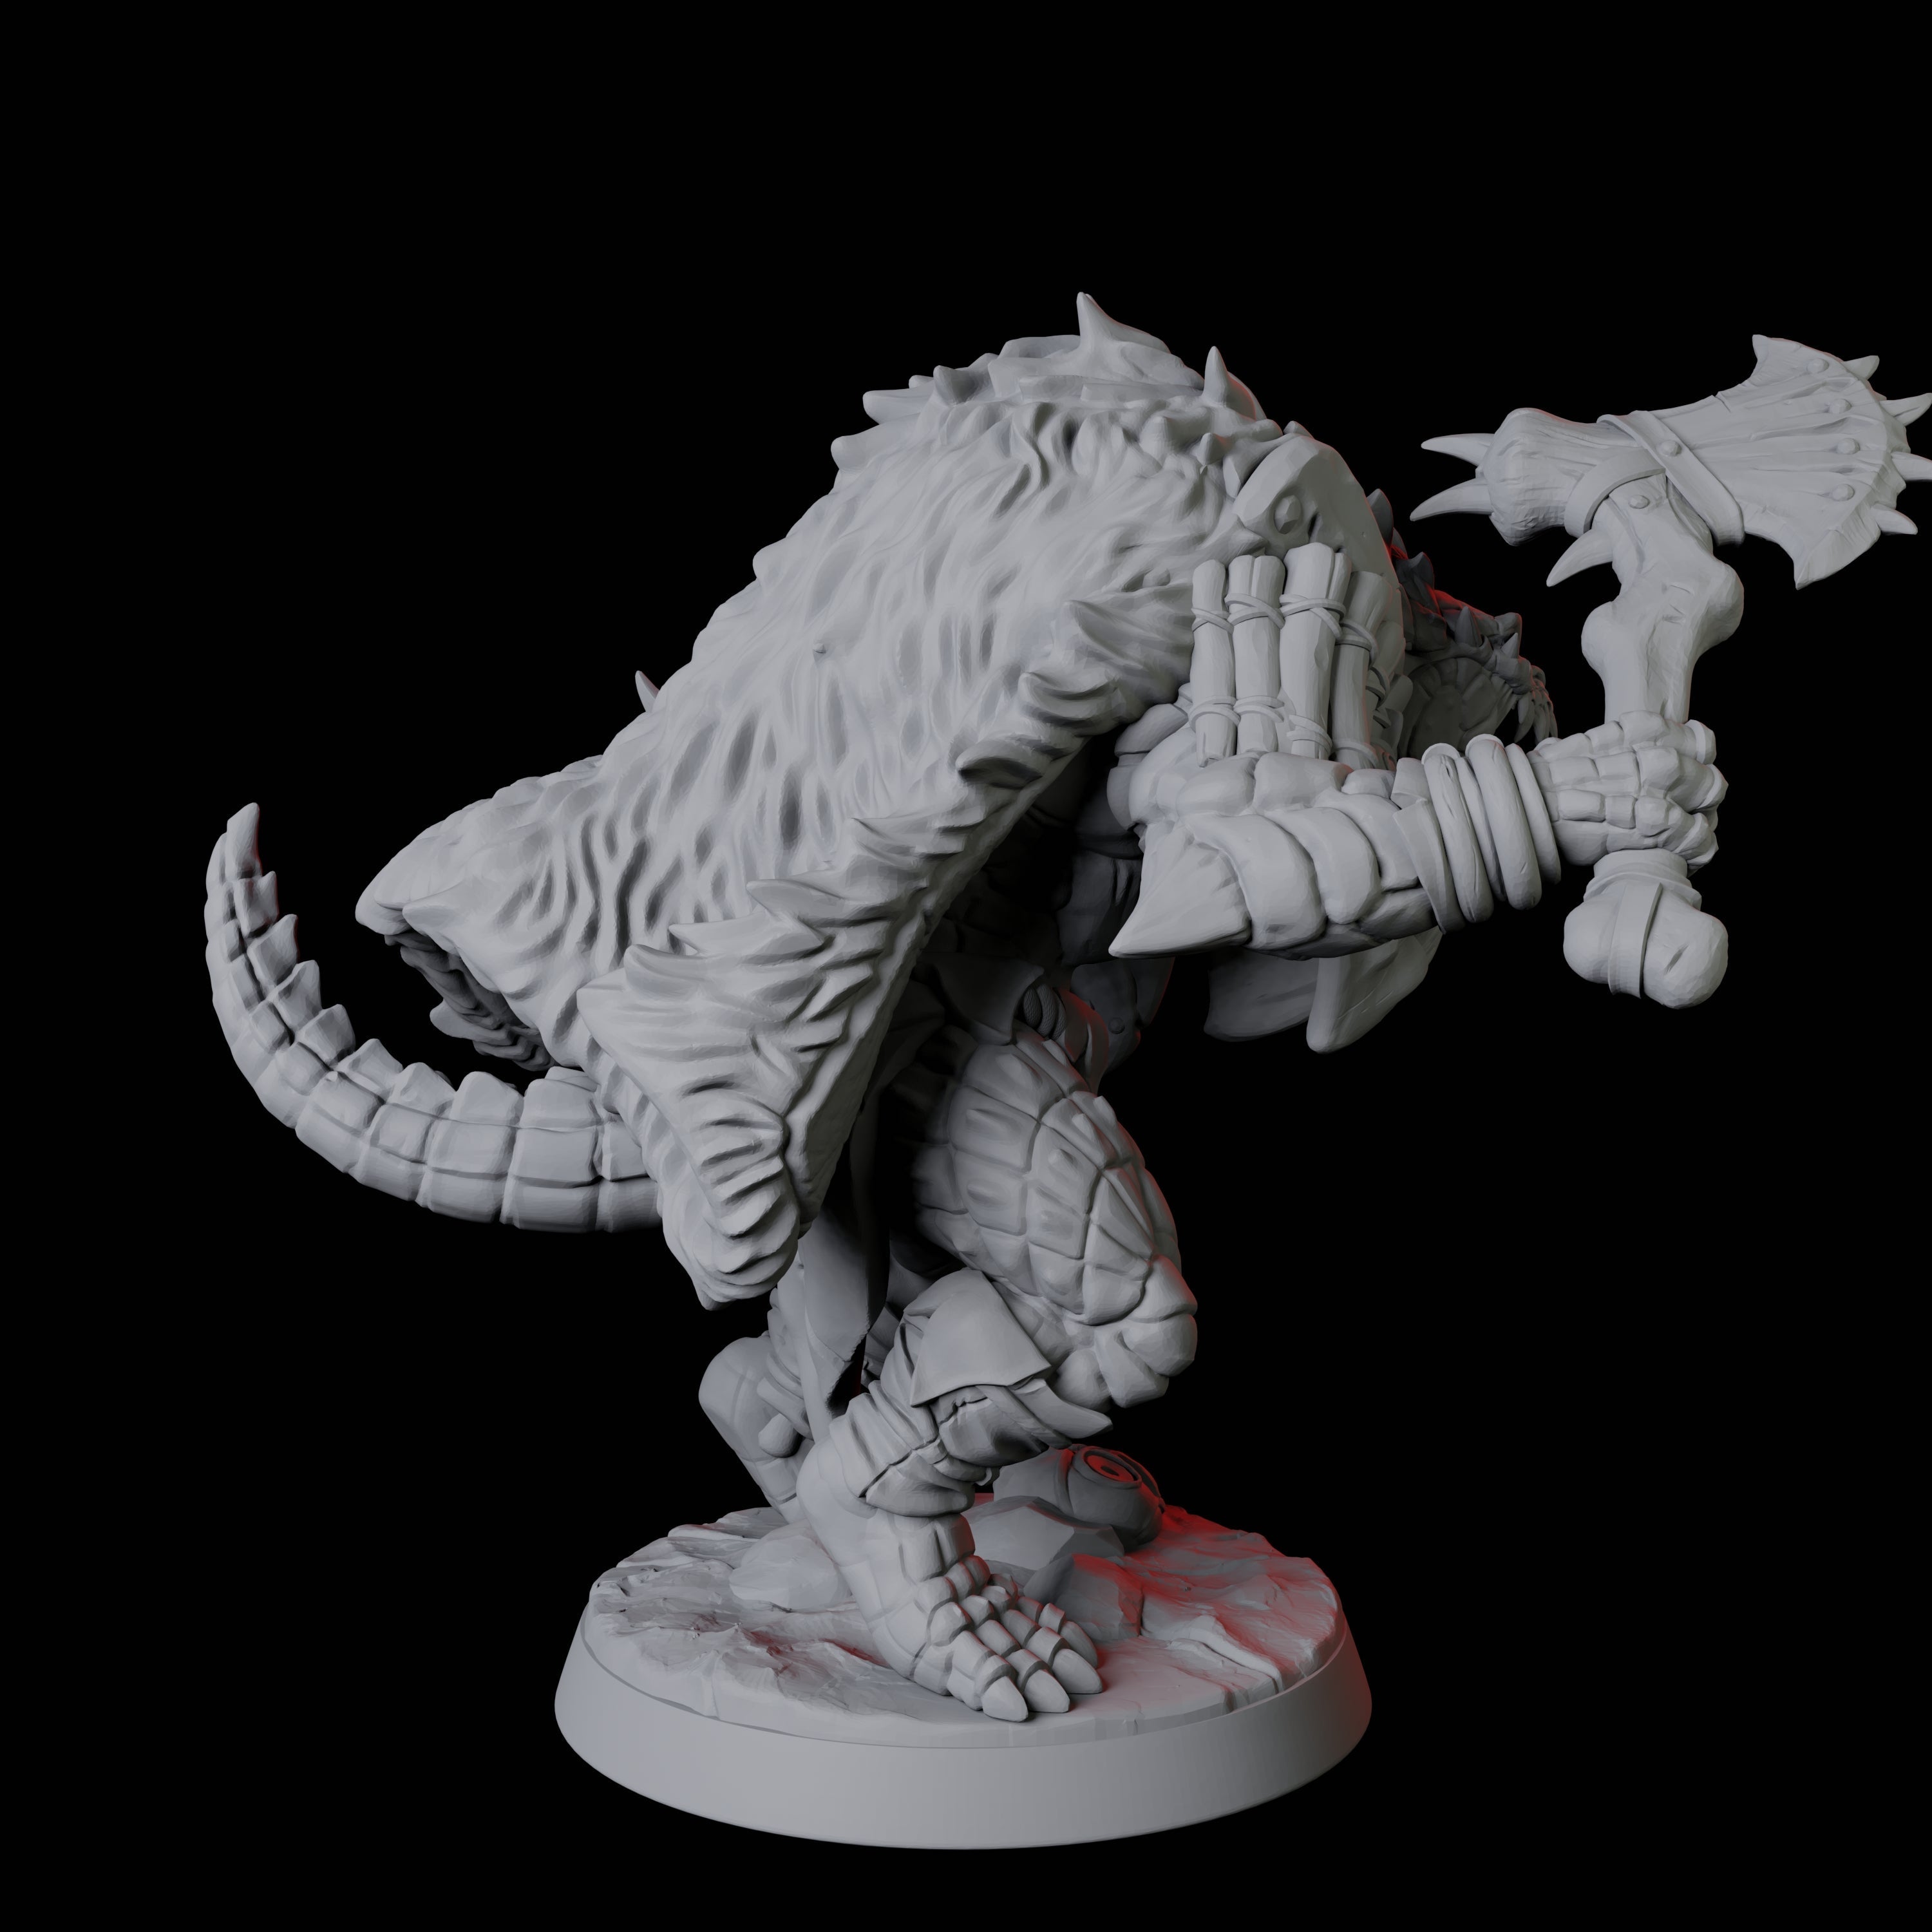 Powerful Frost Lizardfolk D Miniature for Dungeons and Dragons, Pathfinder or other TTRPGs